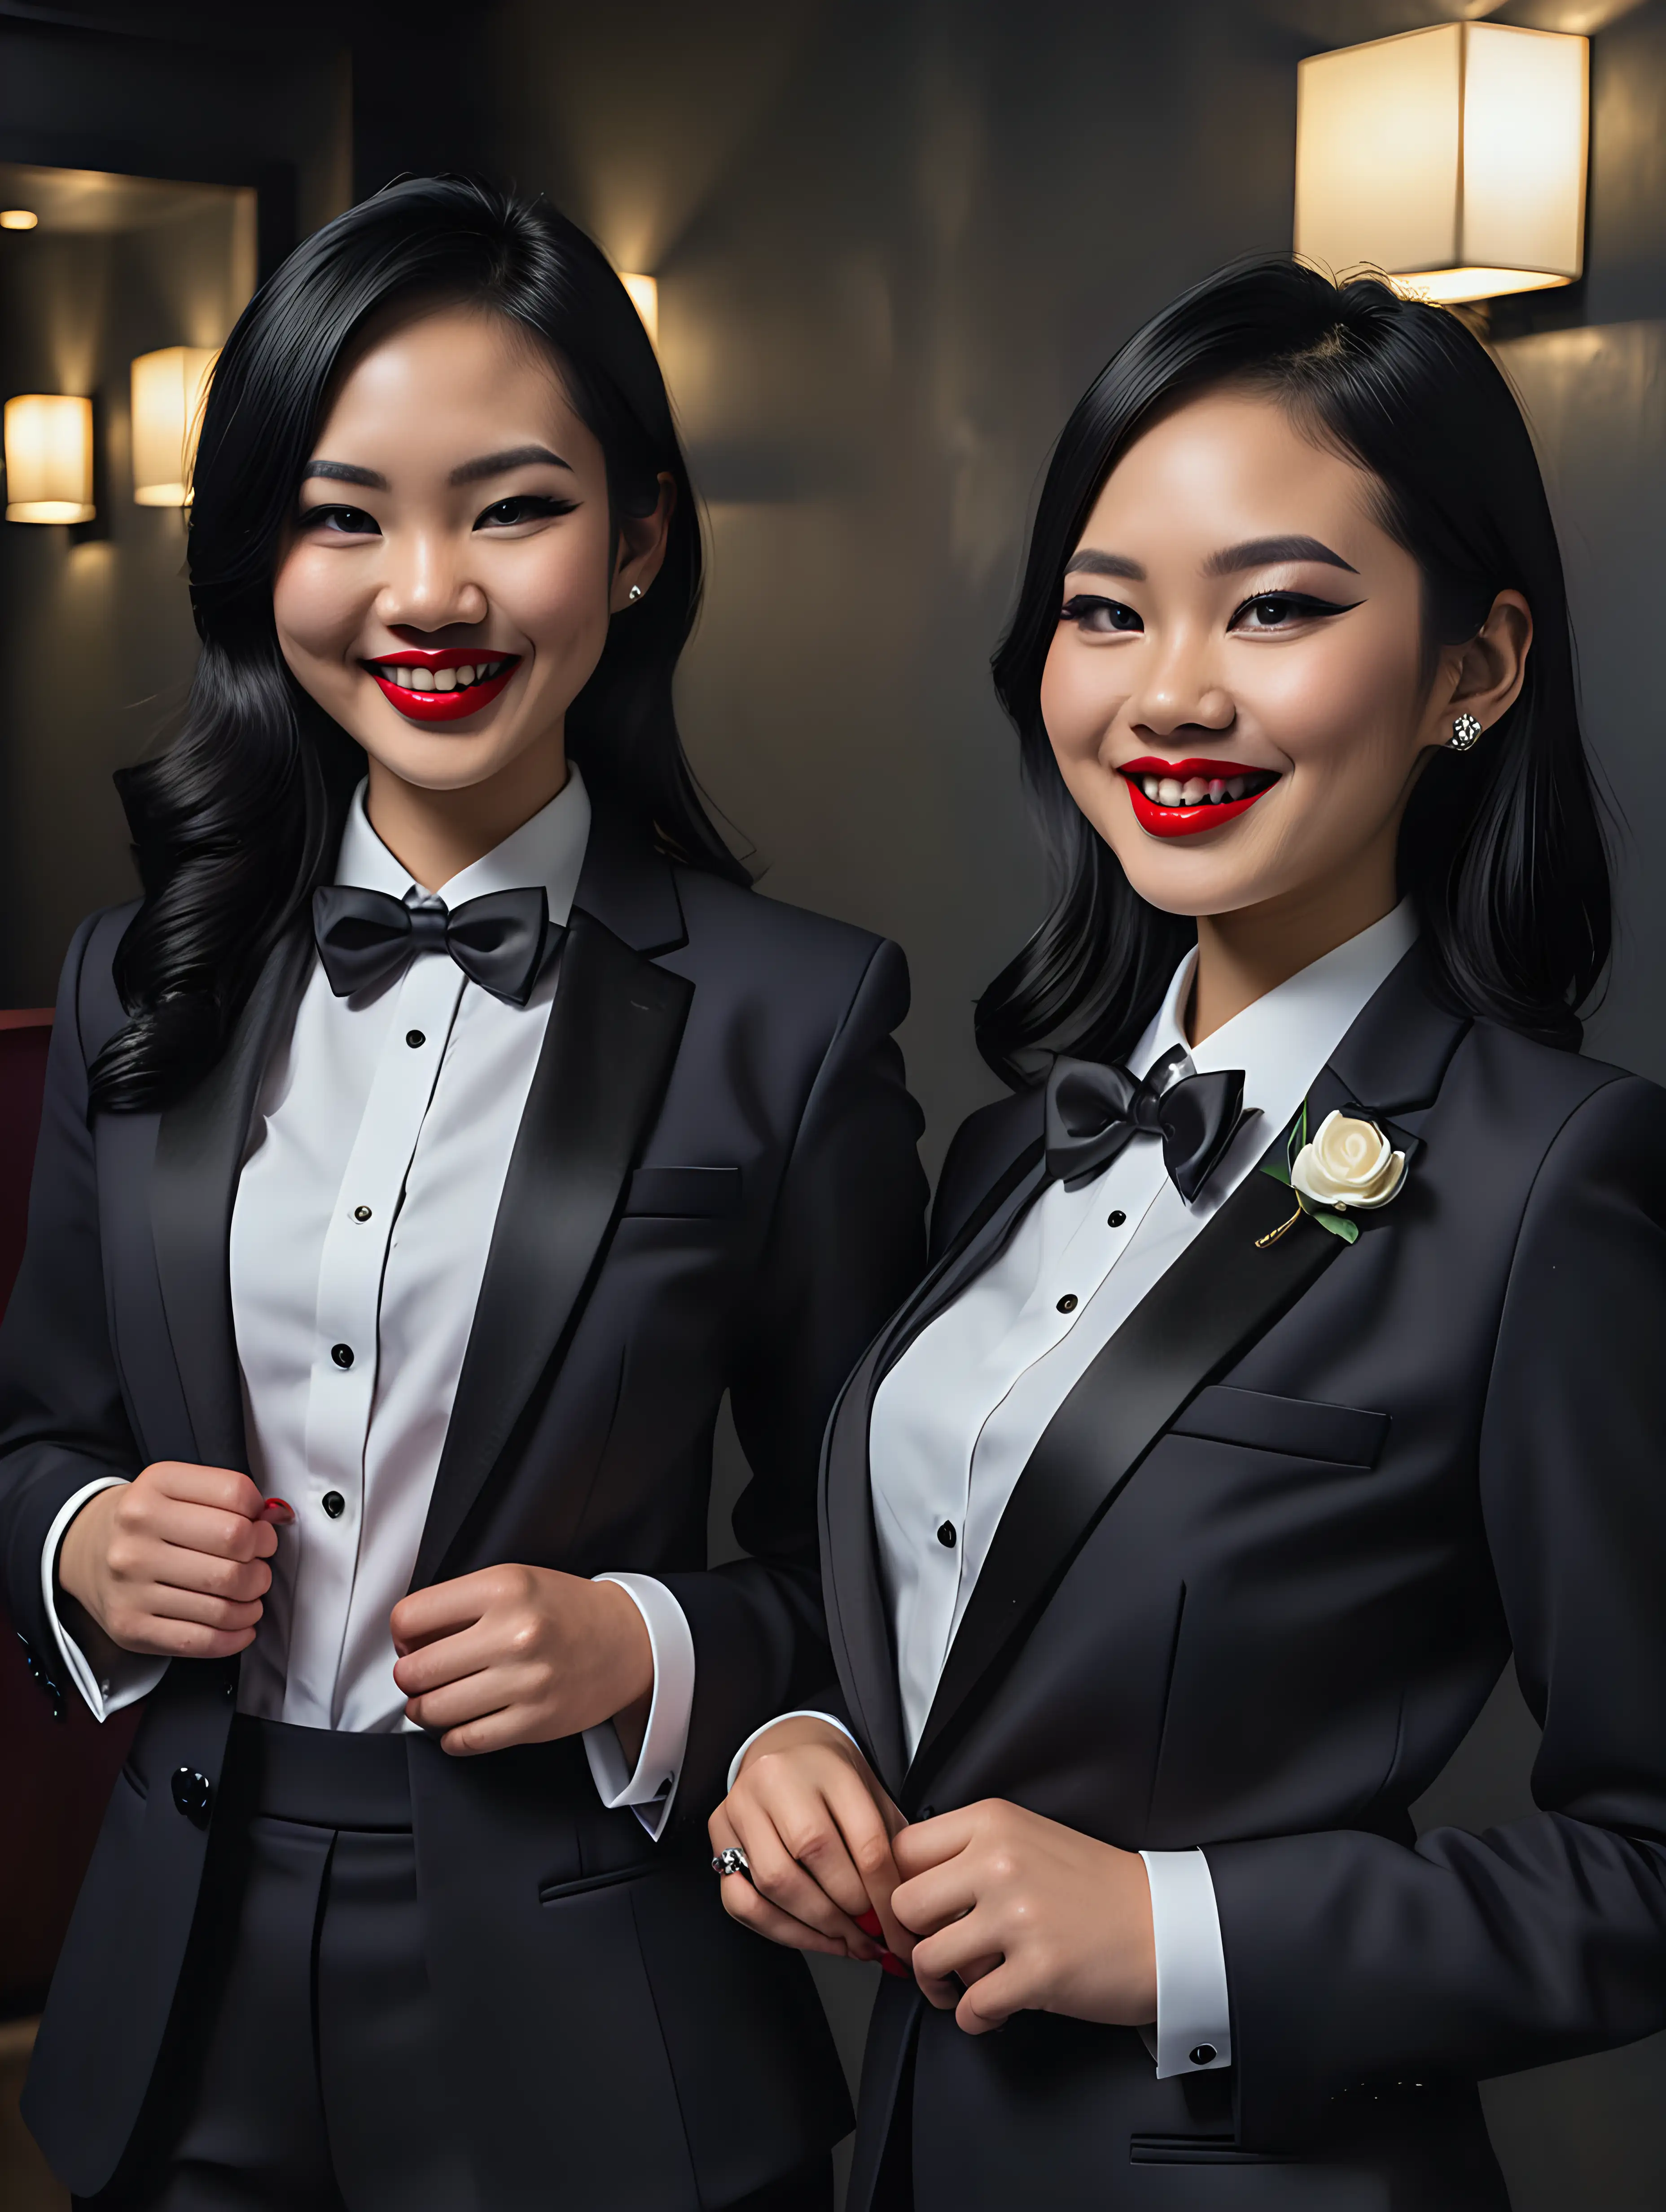 Two 30 year old smiling Vietnamese women with shoulder length black hair and lipstick wearing matching tuxedos with a black bow tie. (Their shirt cuffs have cufflinks). Their jackets have a corsage. Their jackets are not buttoned.  Their jackets are open. They are standing in a dark room.